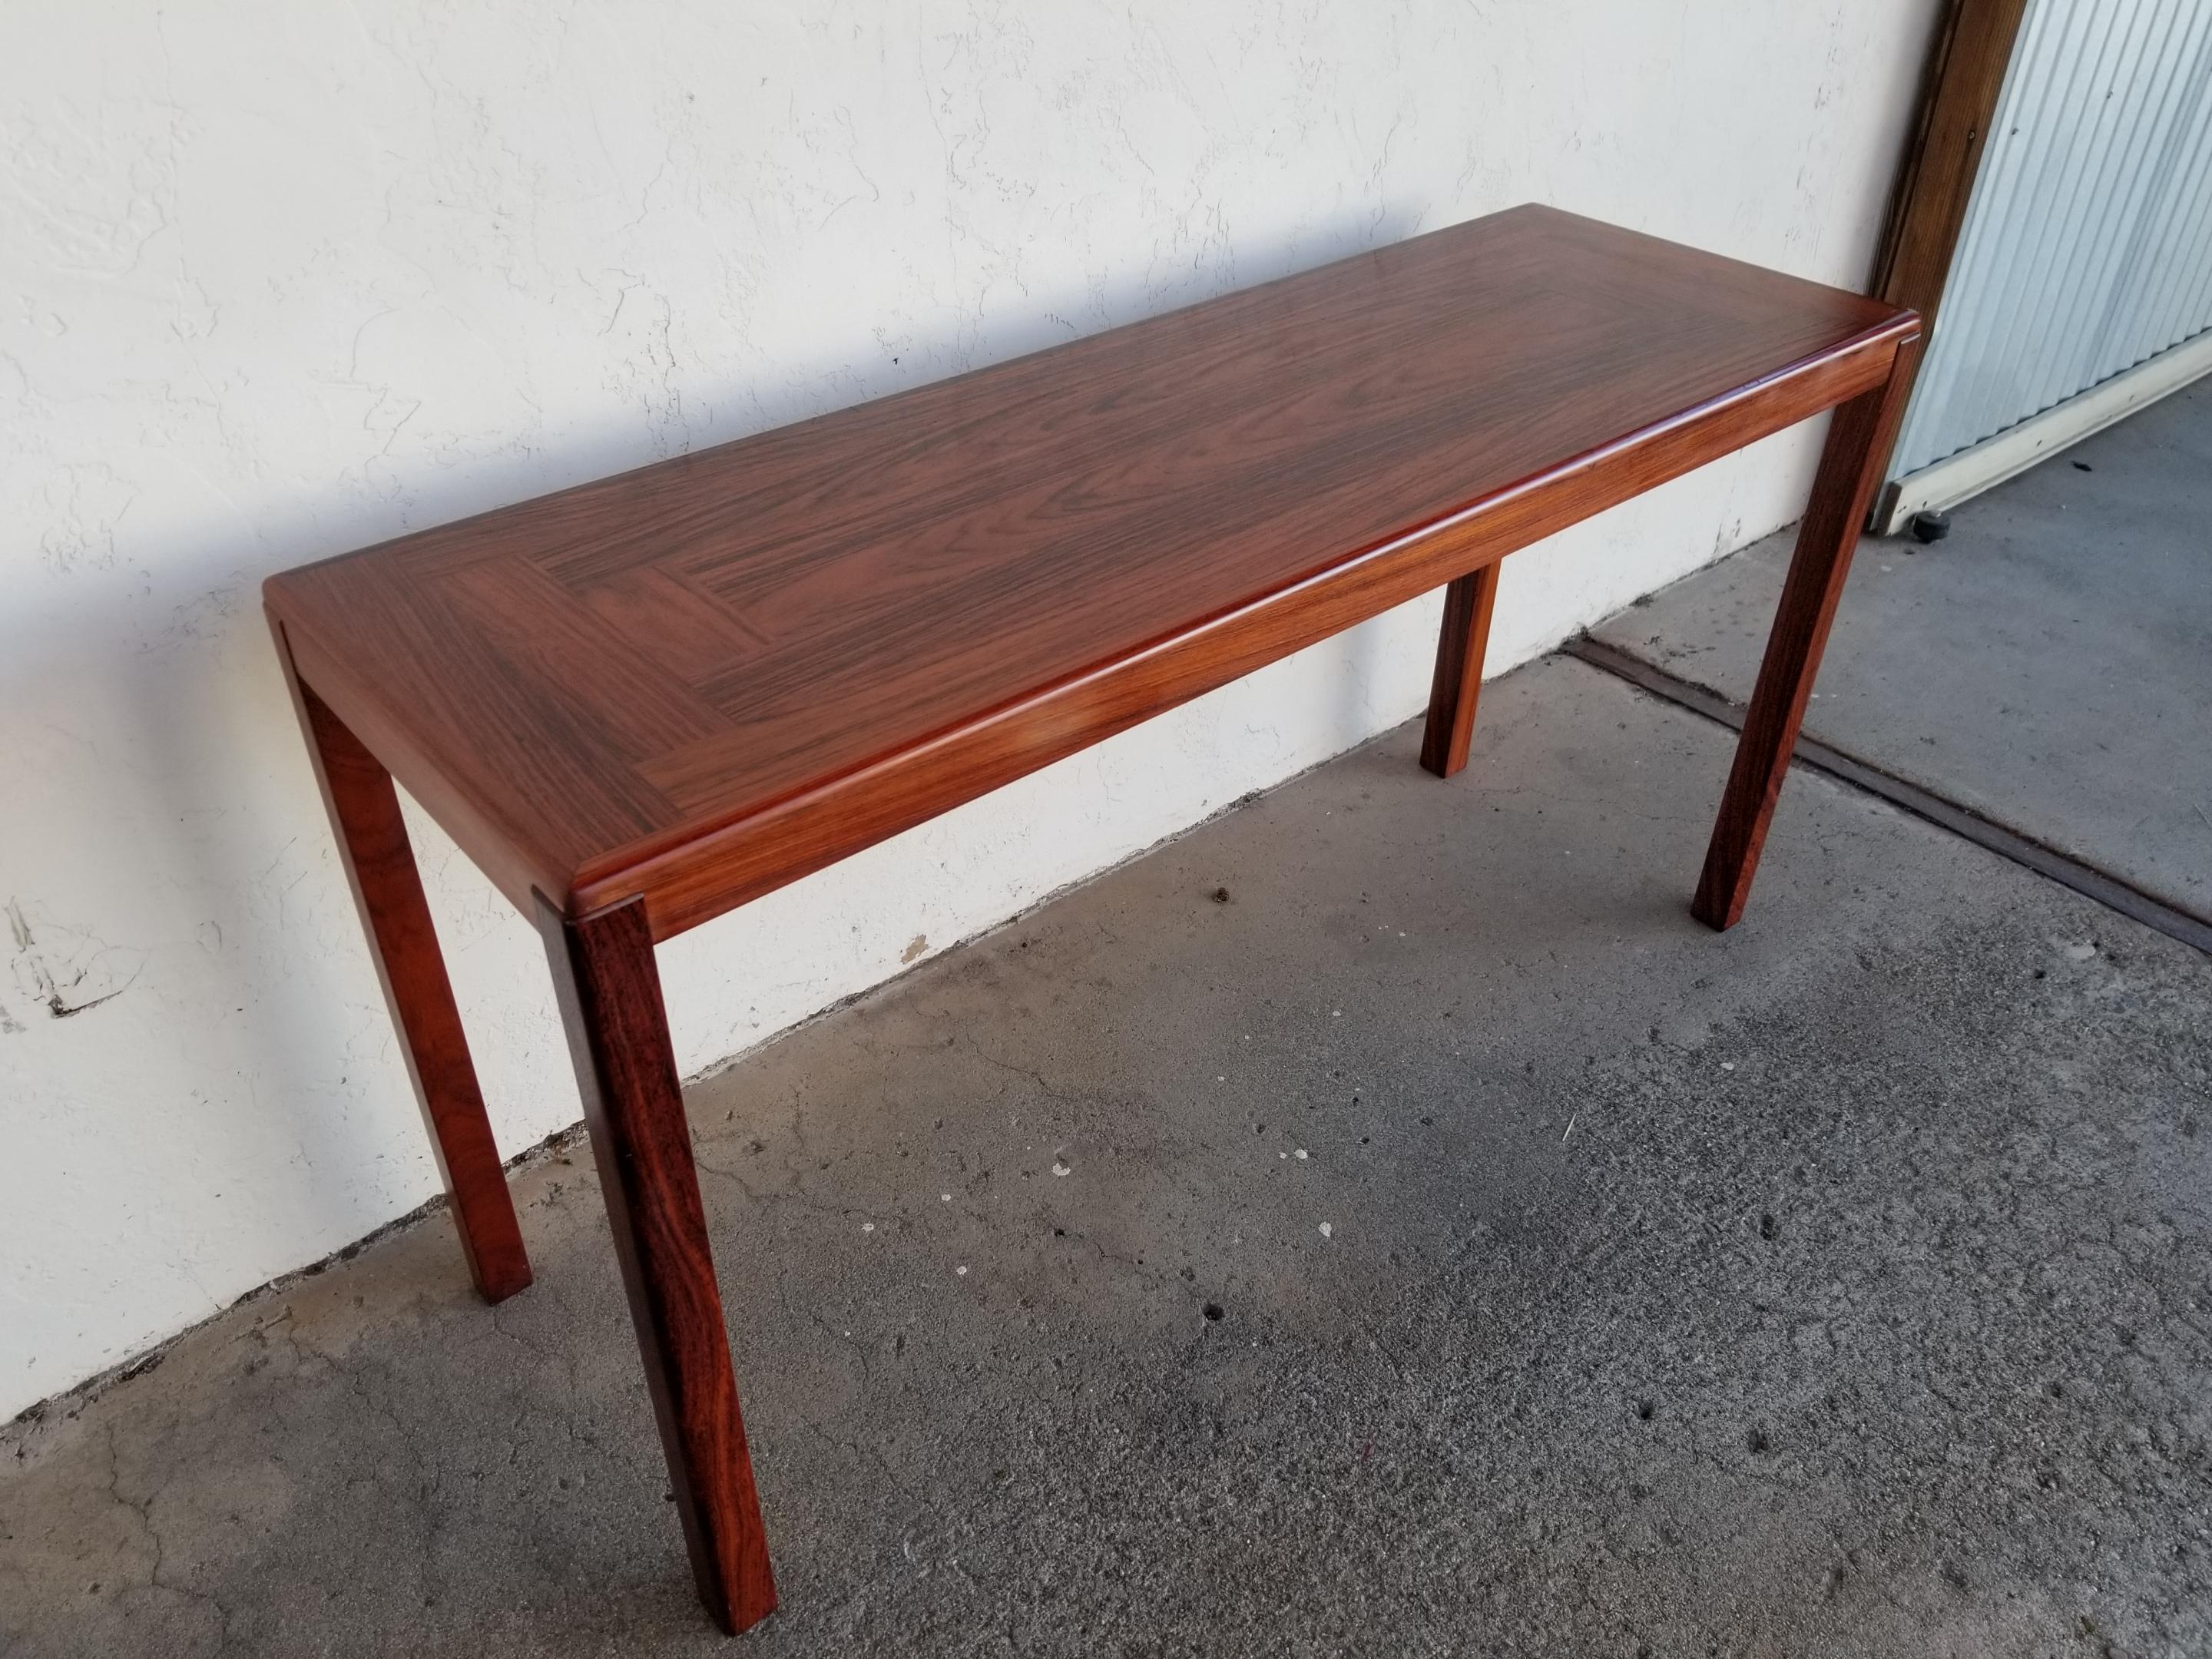 Beautiful Vejle Stole rosewood console table with rectangular parquet top. Solid rosewood legs. Made in Denmark, circa 1970. Makers mark stamped on underside. Very good vintage condition with original finish. Age appropriate wear with various